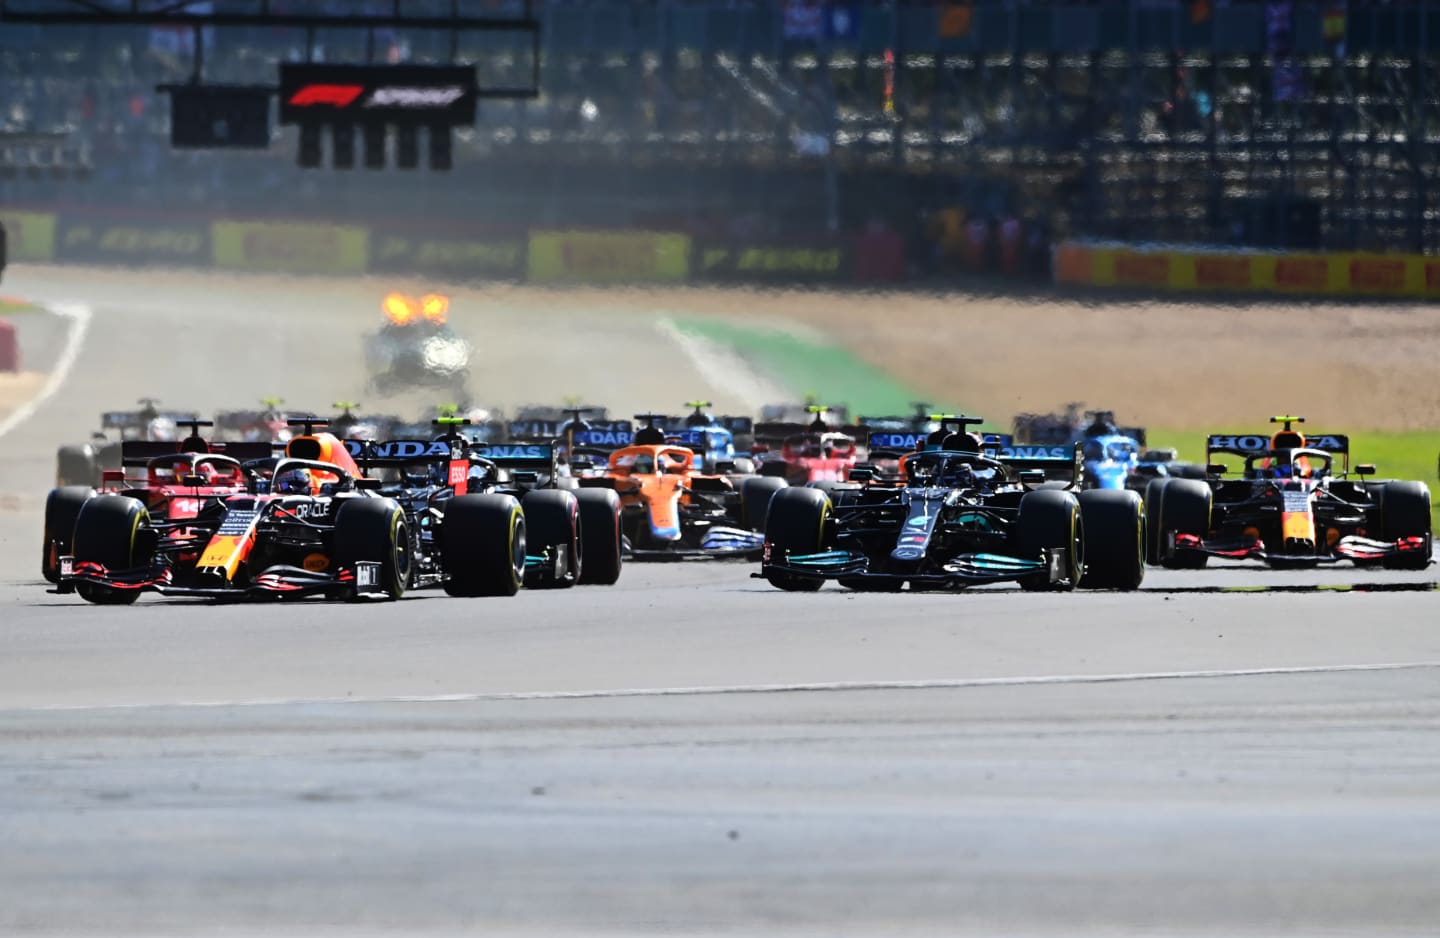 NORTHAMPTON, ENGLAND - JULY 17: Max Verstappen of the Netherlands driving the (33) Red Bull Racing RB16B Honda leads the field into turn one at the start during the Sprint for the F1 Grand Prix of Great Britain at Silverstone on July 17, 2021 in Northampton, England. (Photo by Michael Regan/Getty Images)